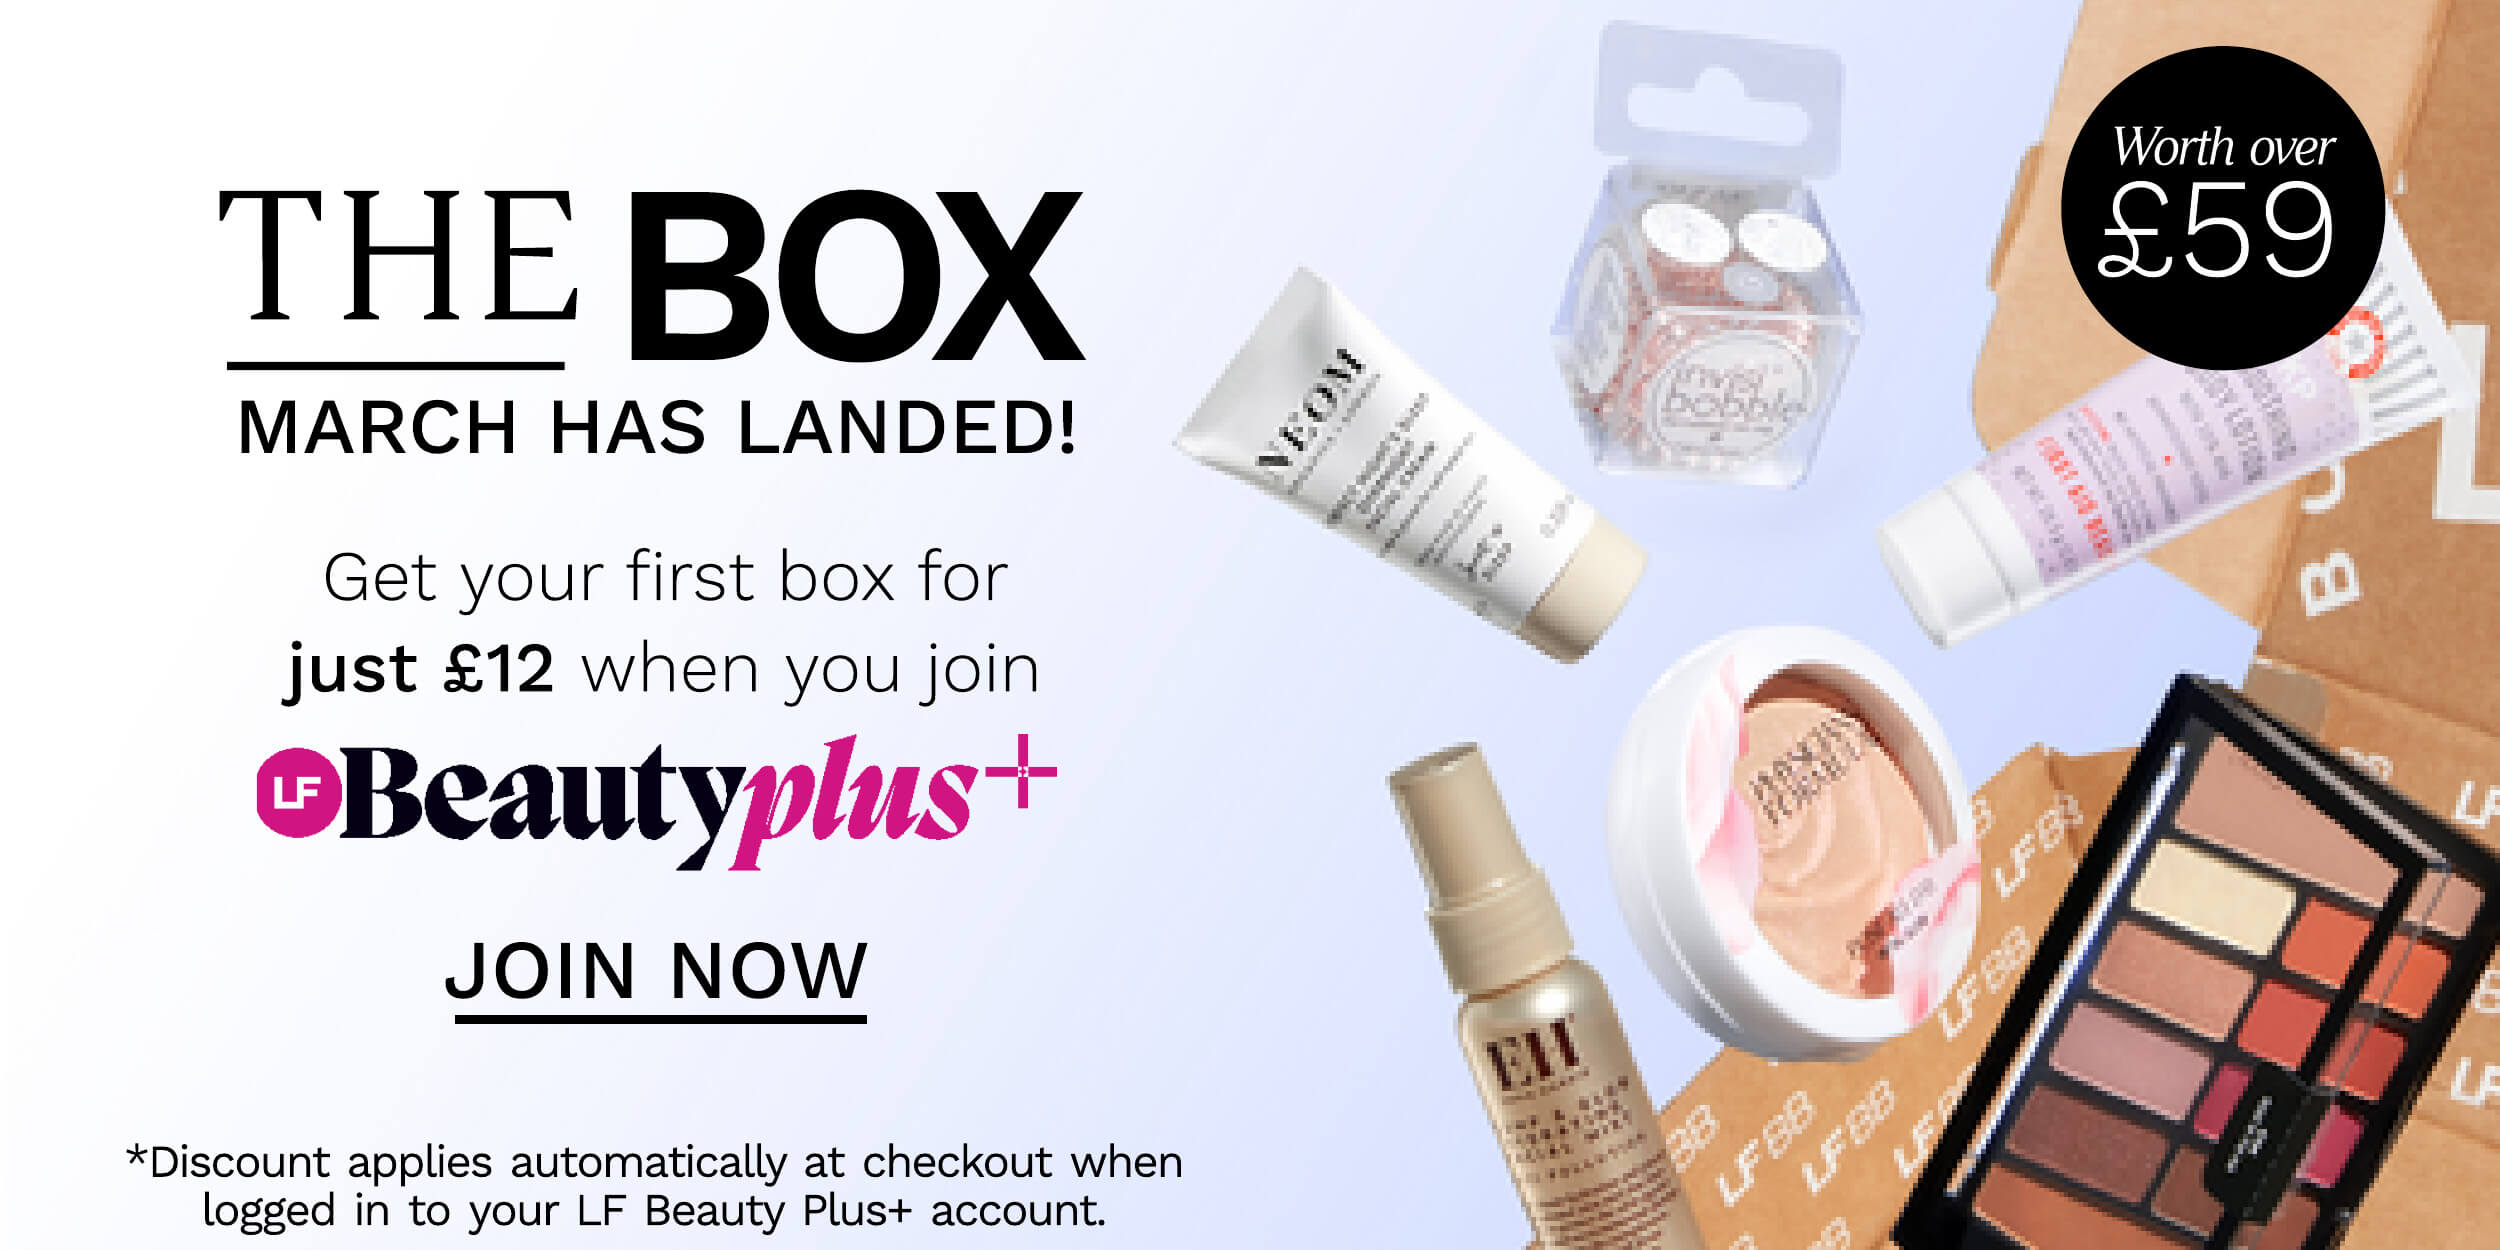 THE BOX MARCH HAS LANDED! Get your first box for just 12 when you join OBeautyplus JOIN NOW *Discount applies automatically at checkout when logged in to your LF Beauty Plus account. 